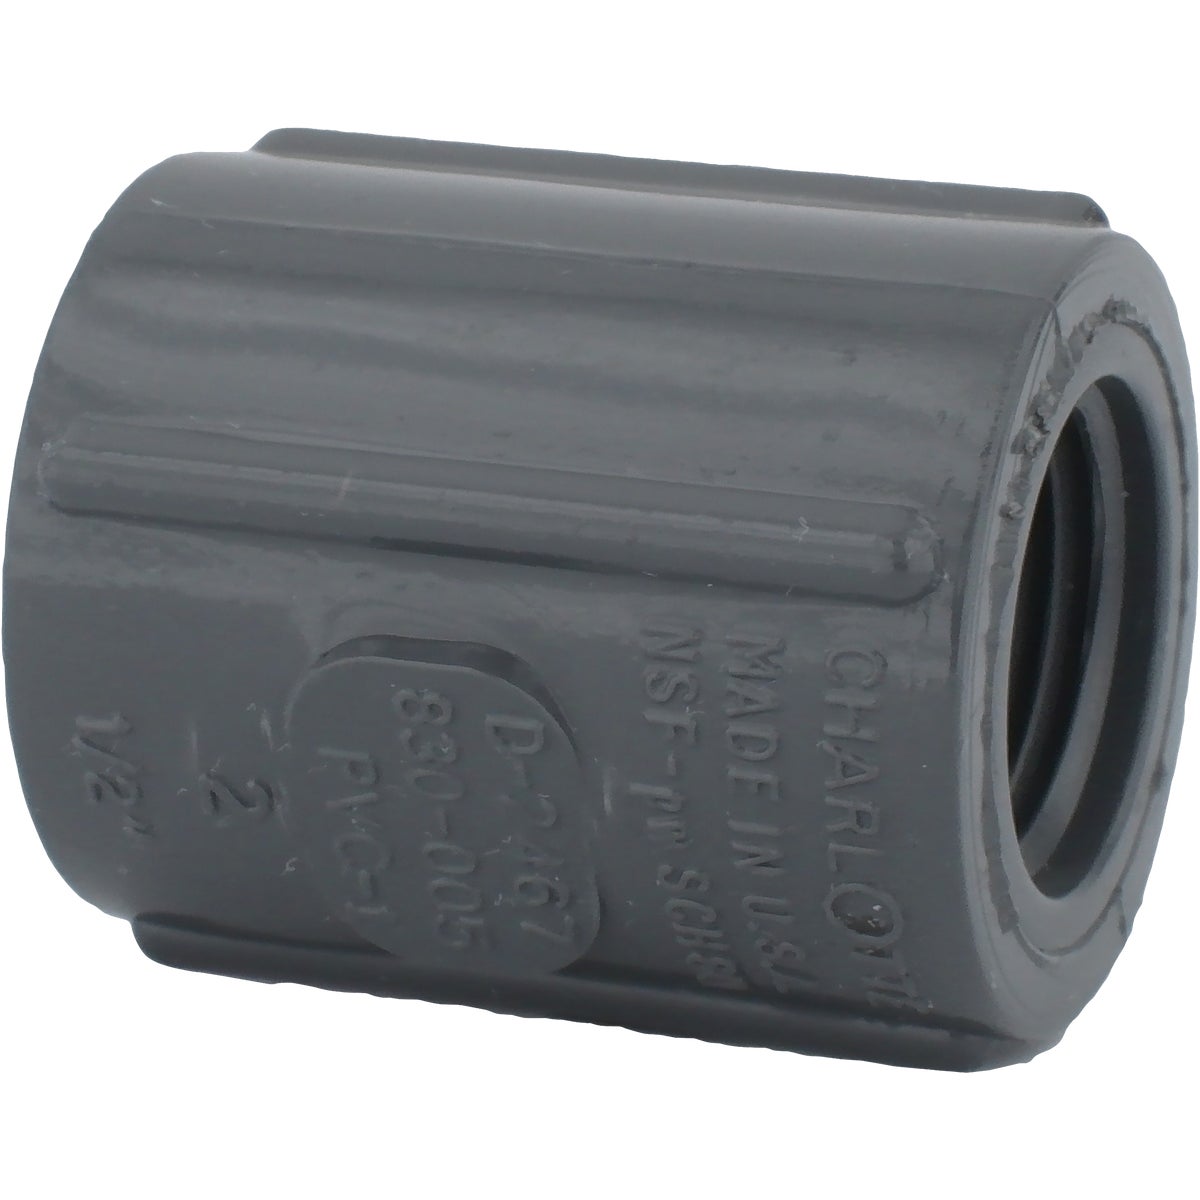 Item 437806, PVC Coupling is used to join lengths of pipe.